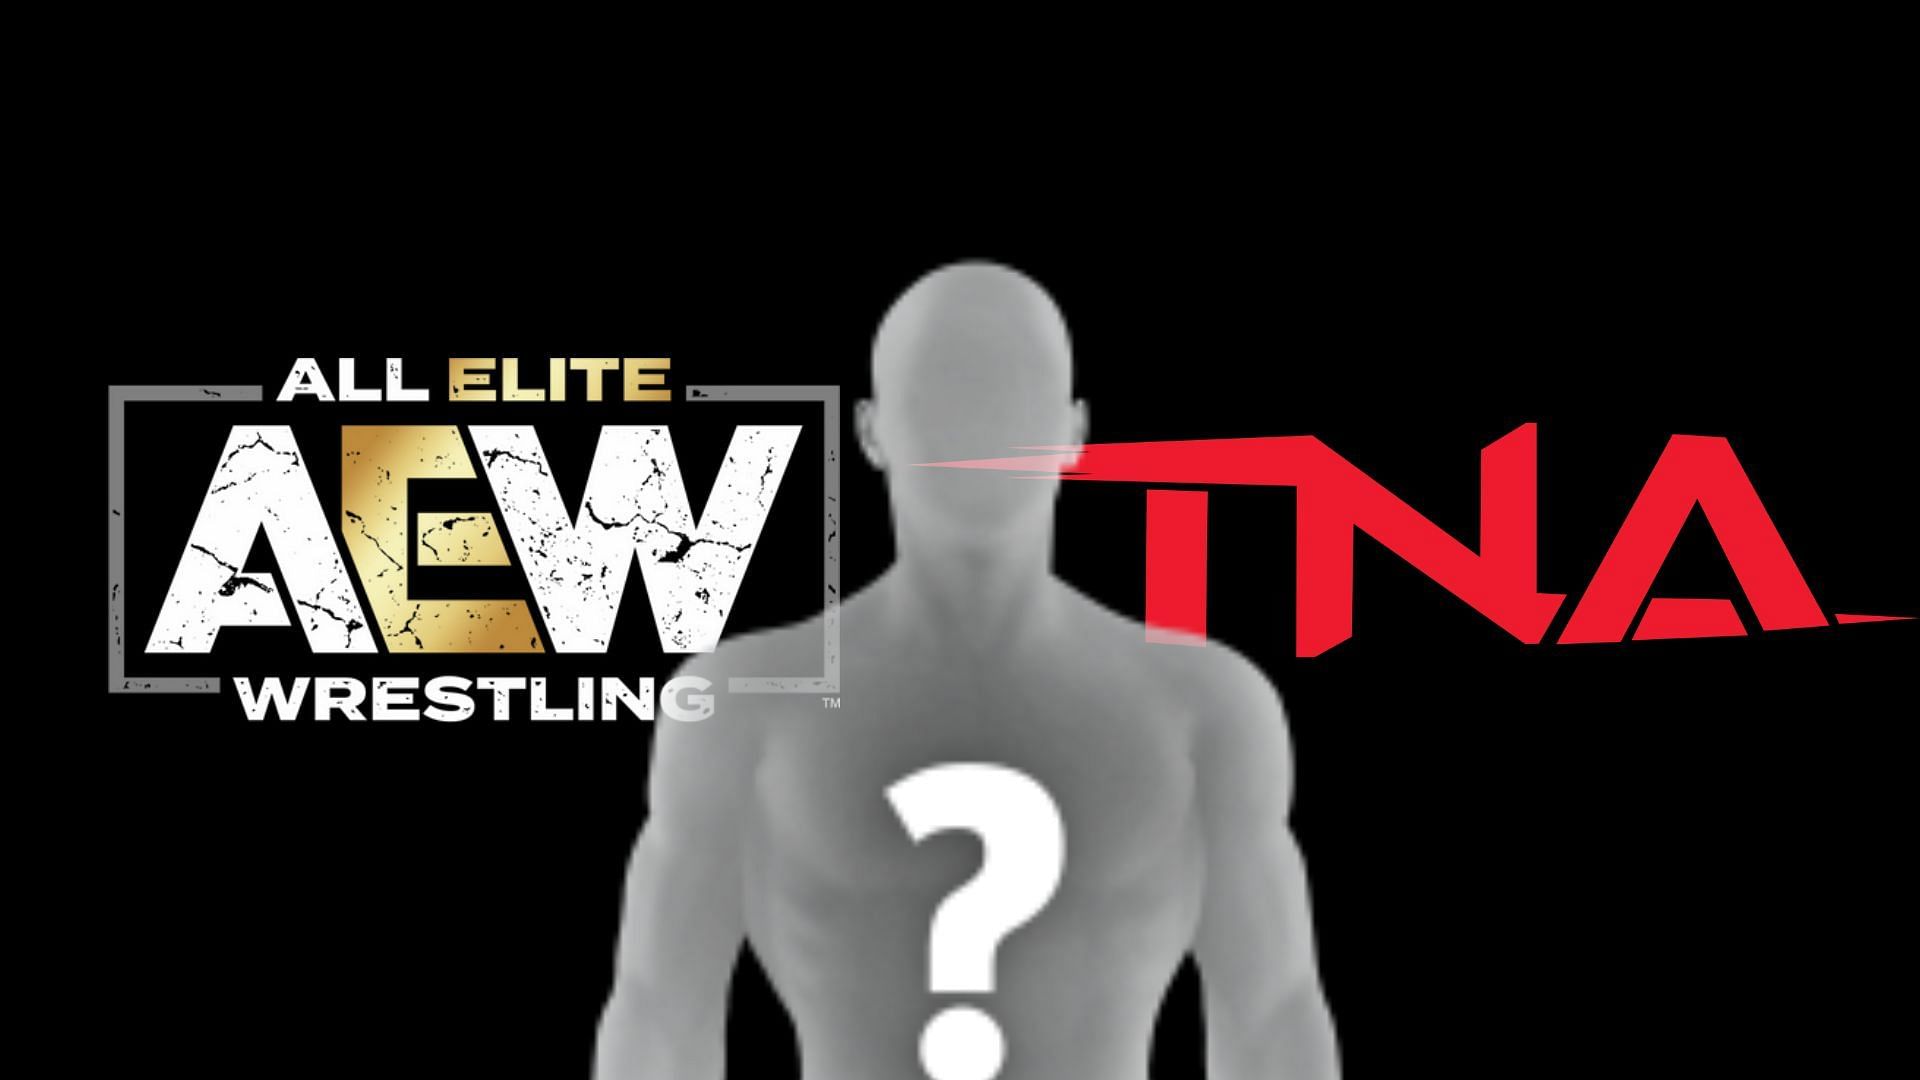 A former TNA star addressed the idea of joining All Elite Wrestling